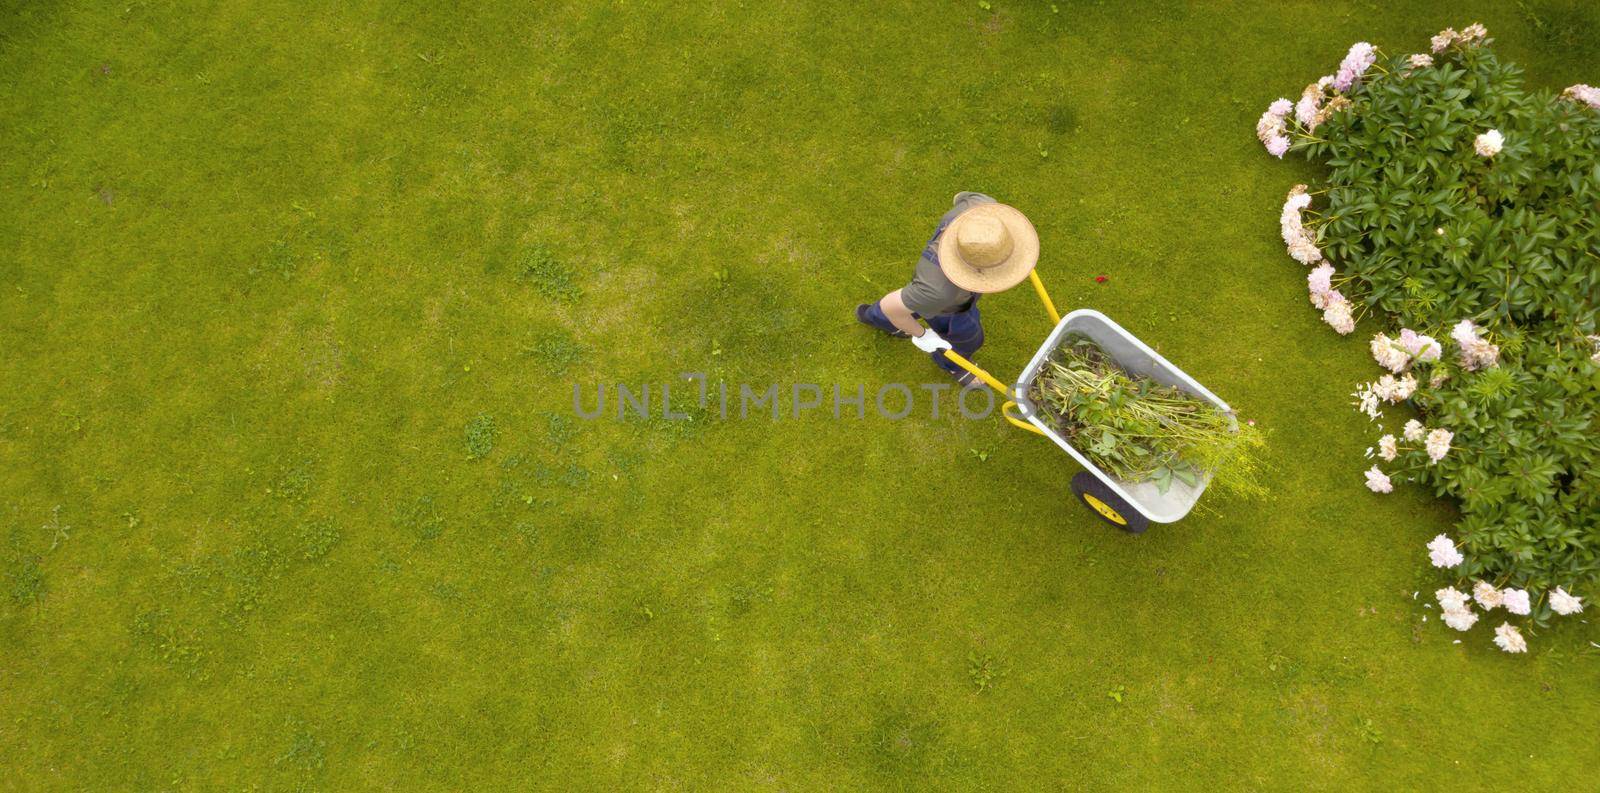 A young man with hands in gloves is carrying a metal garden cart through his beautiful green blooming garden. A professional gardener is carrying a wheelbarrow full of grass